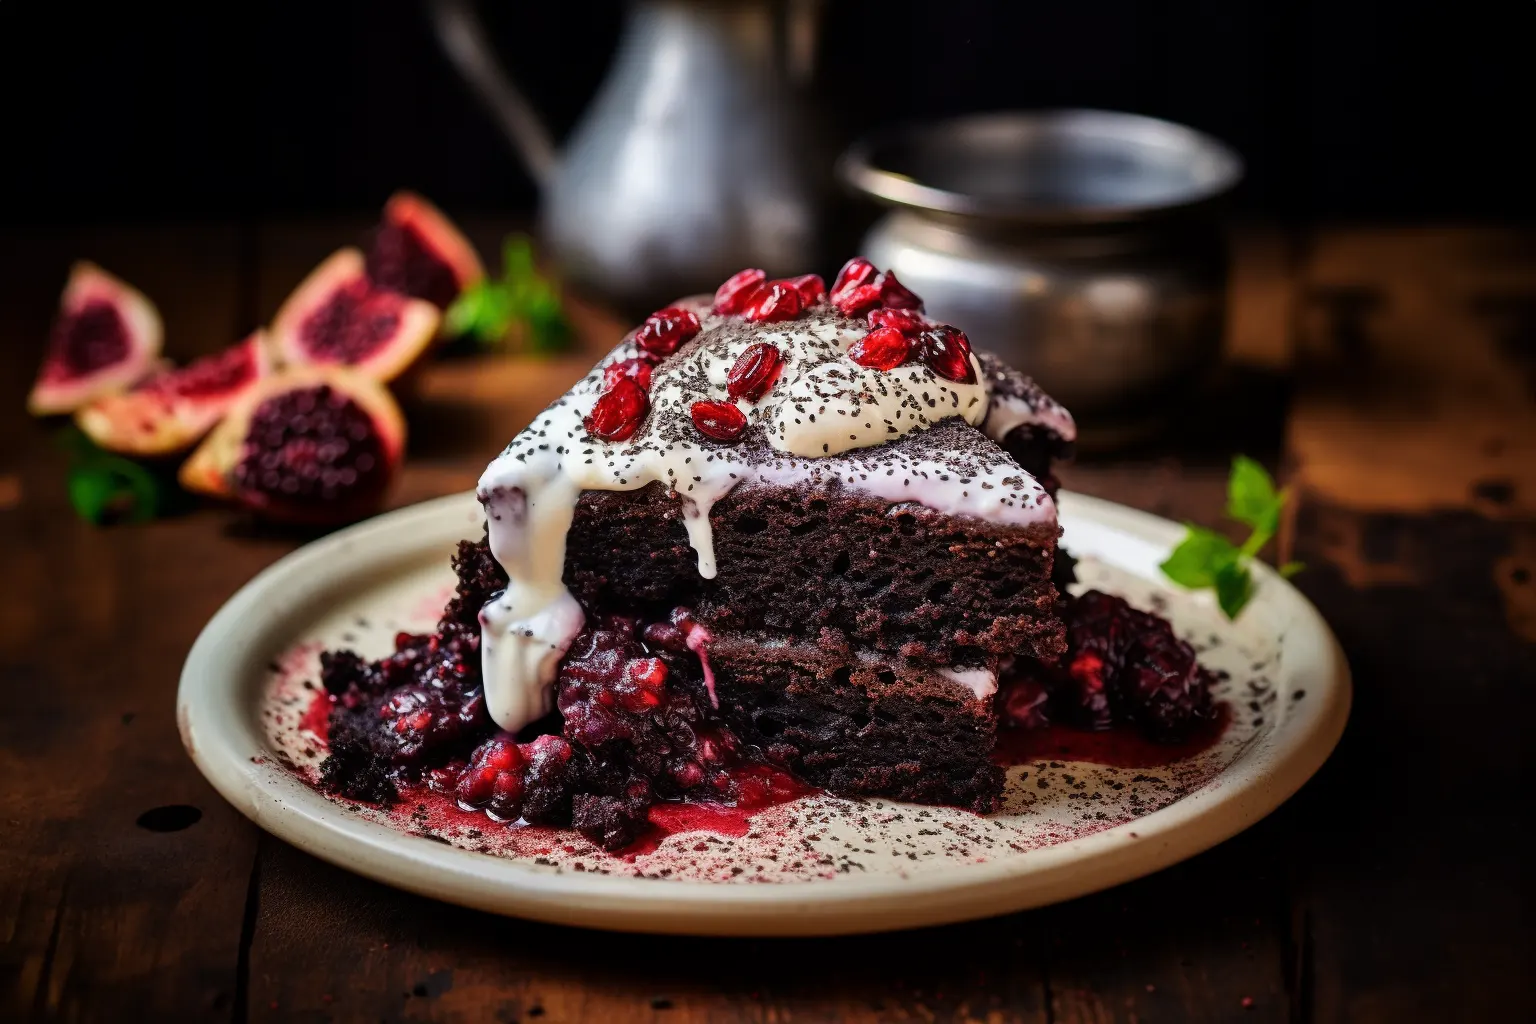 Super Sloppy Chocolate Cake with Beetroot